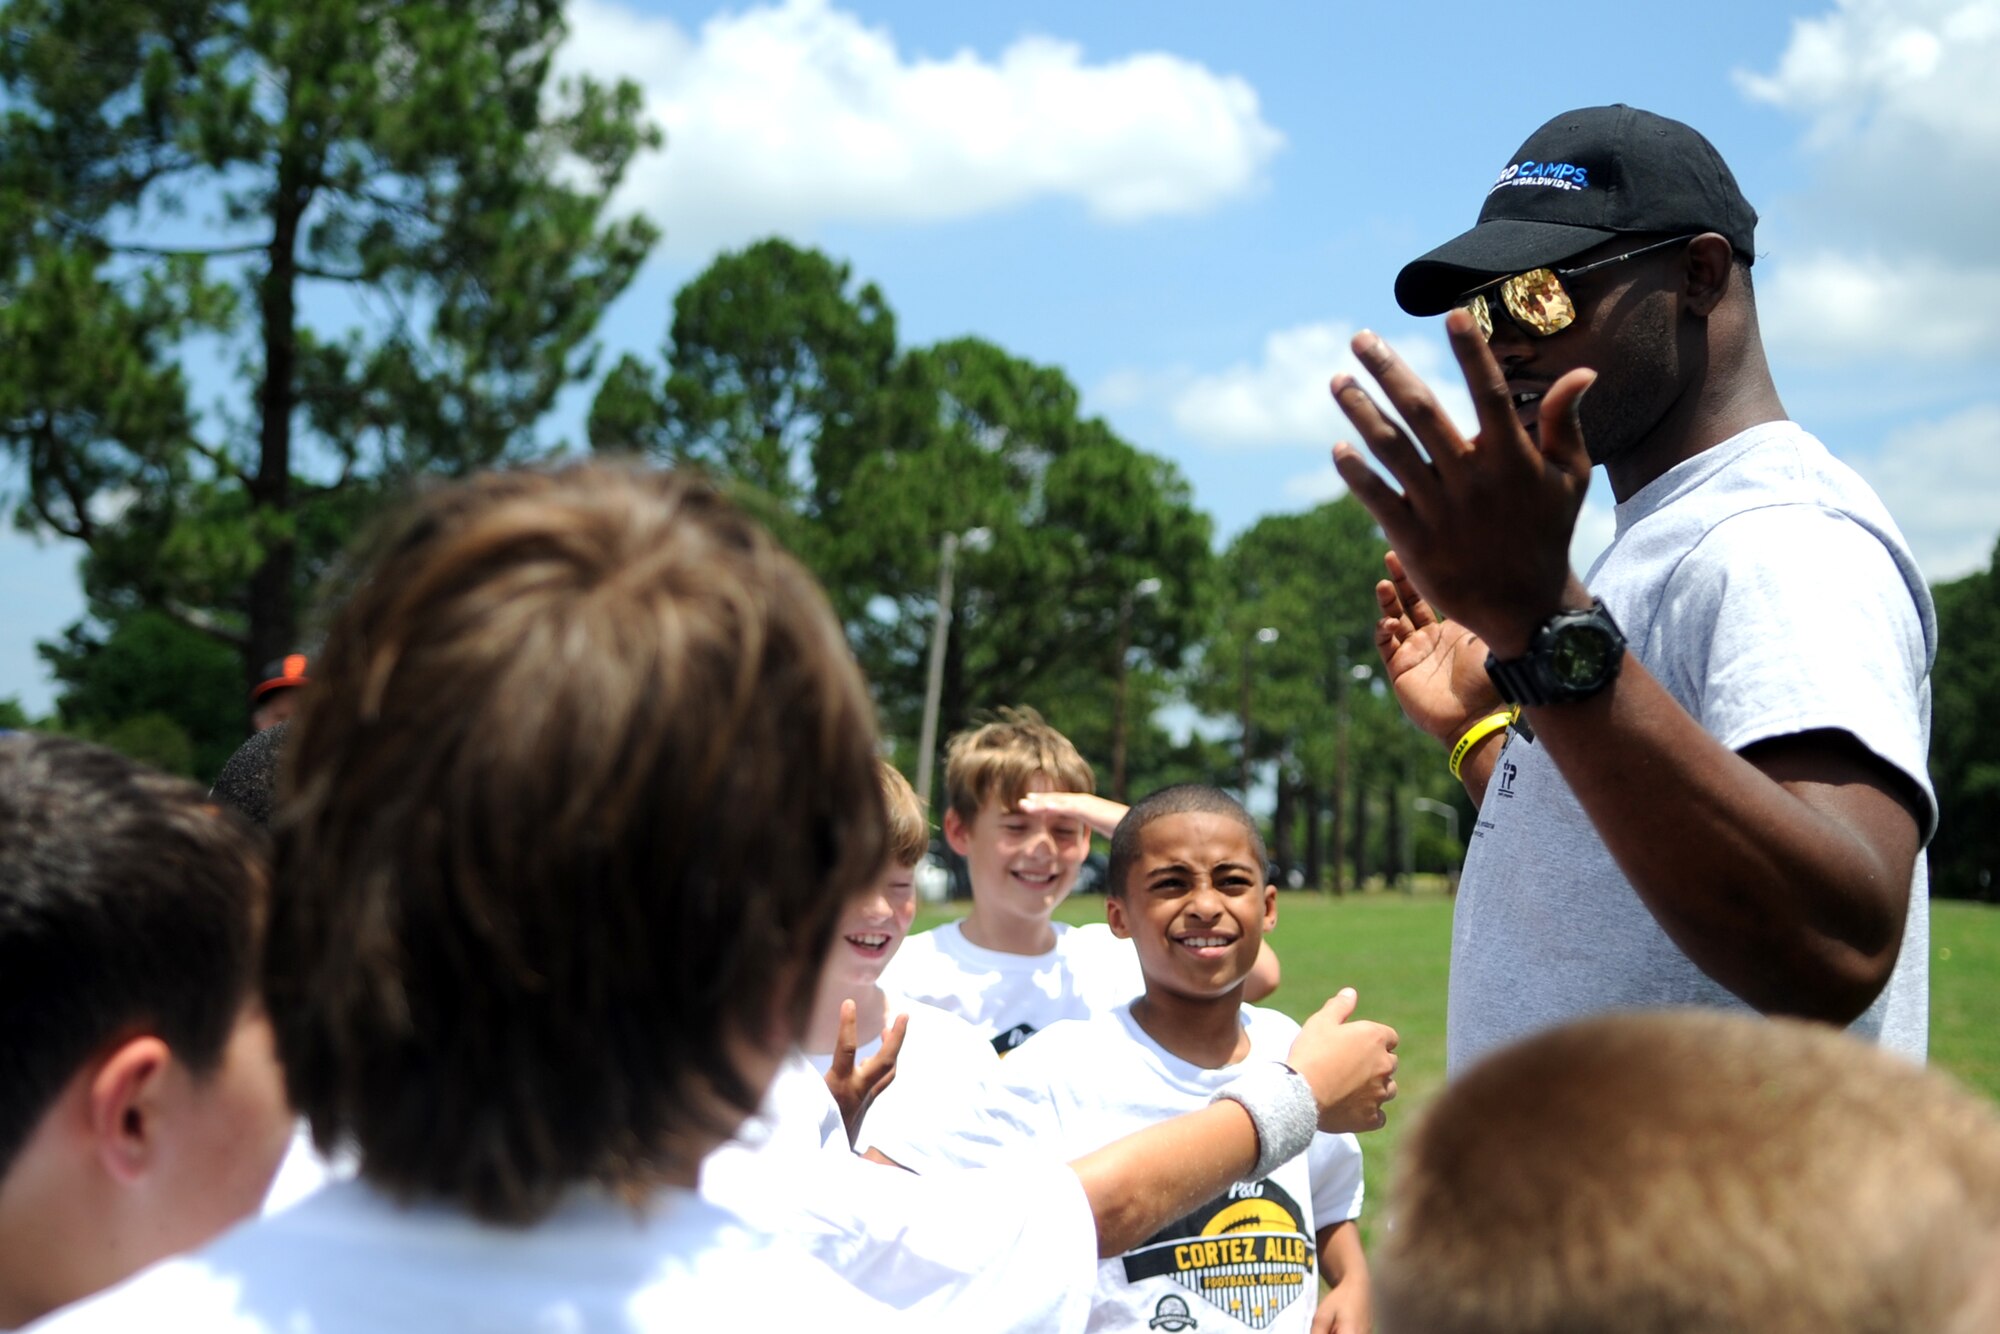 Cortez Allen, Pittsburgh Steelers defensive back, hypes up young athletes at the start of a National Football League ProCamp, July 16, 2015, at Seymour Johnson Air Force Base, North Carolina. The free, two-day camp instilled leadership and teamwork skills into children in grades one through eight. (U.S. Air Force photo/Senior Airman Ashley J. Thum)